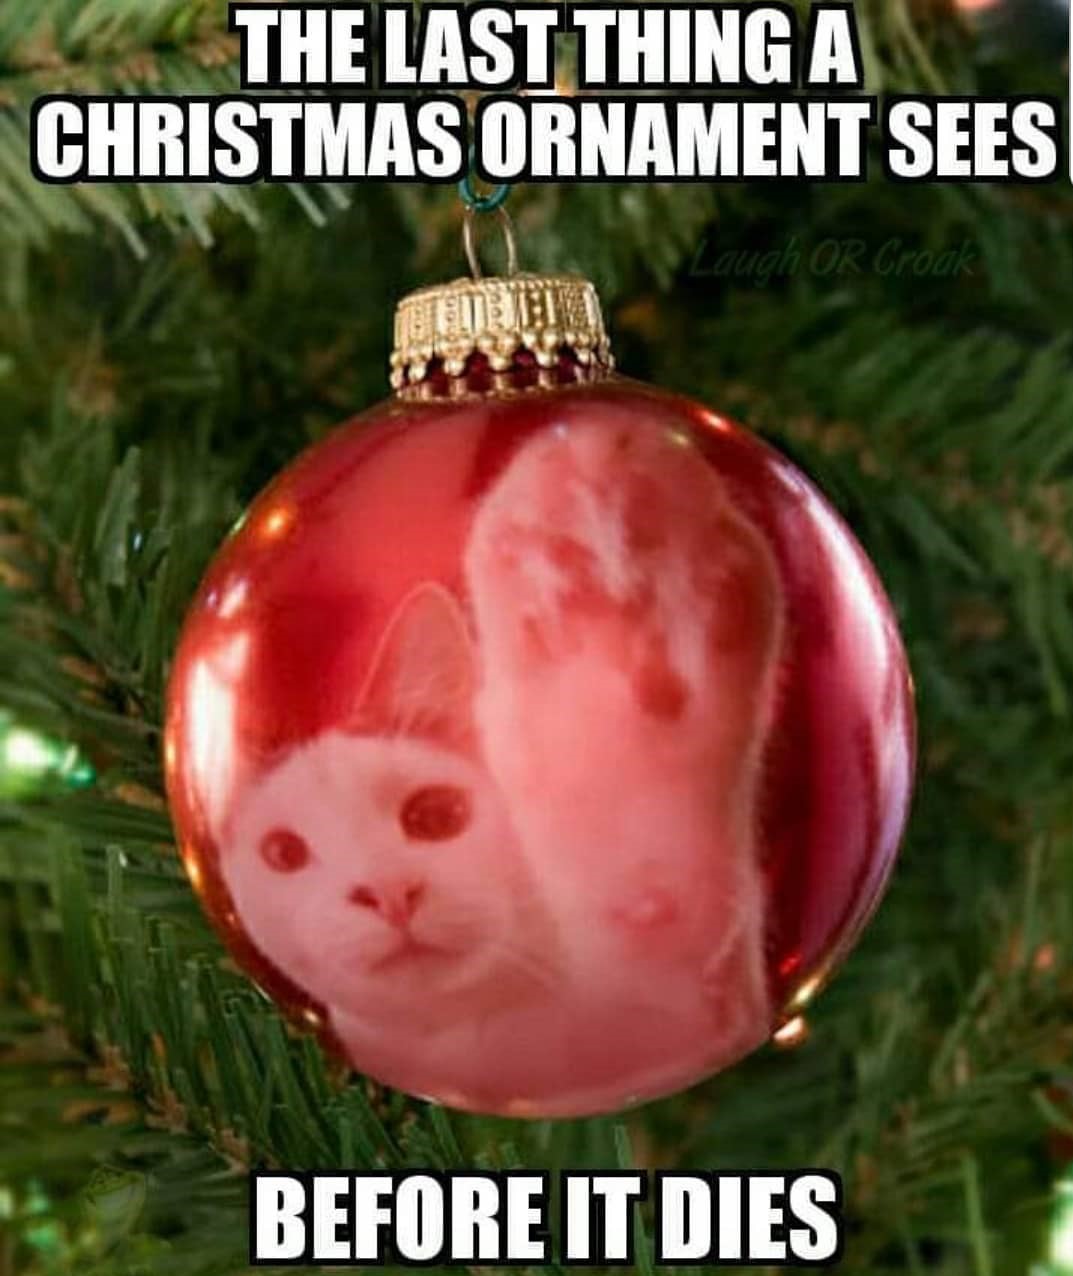 Christmas tree ornament with cat reflected on surface. Caption says "The last thing a Christmas ornament sees before it dies."